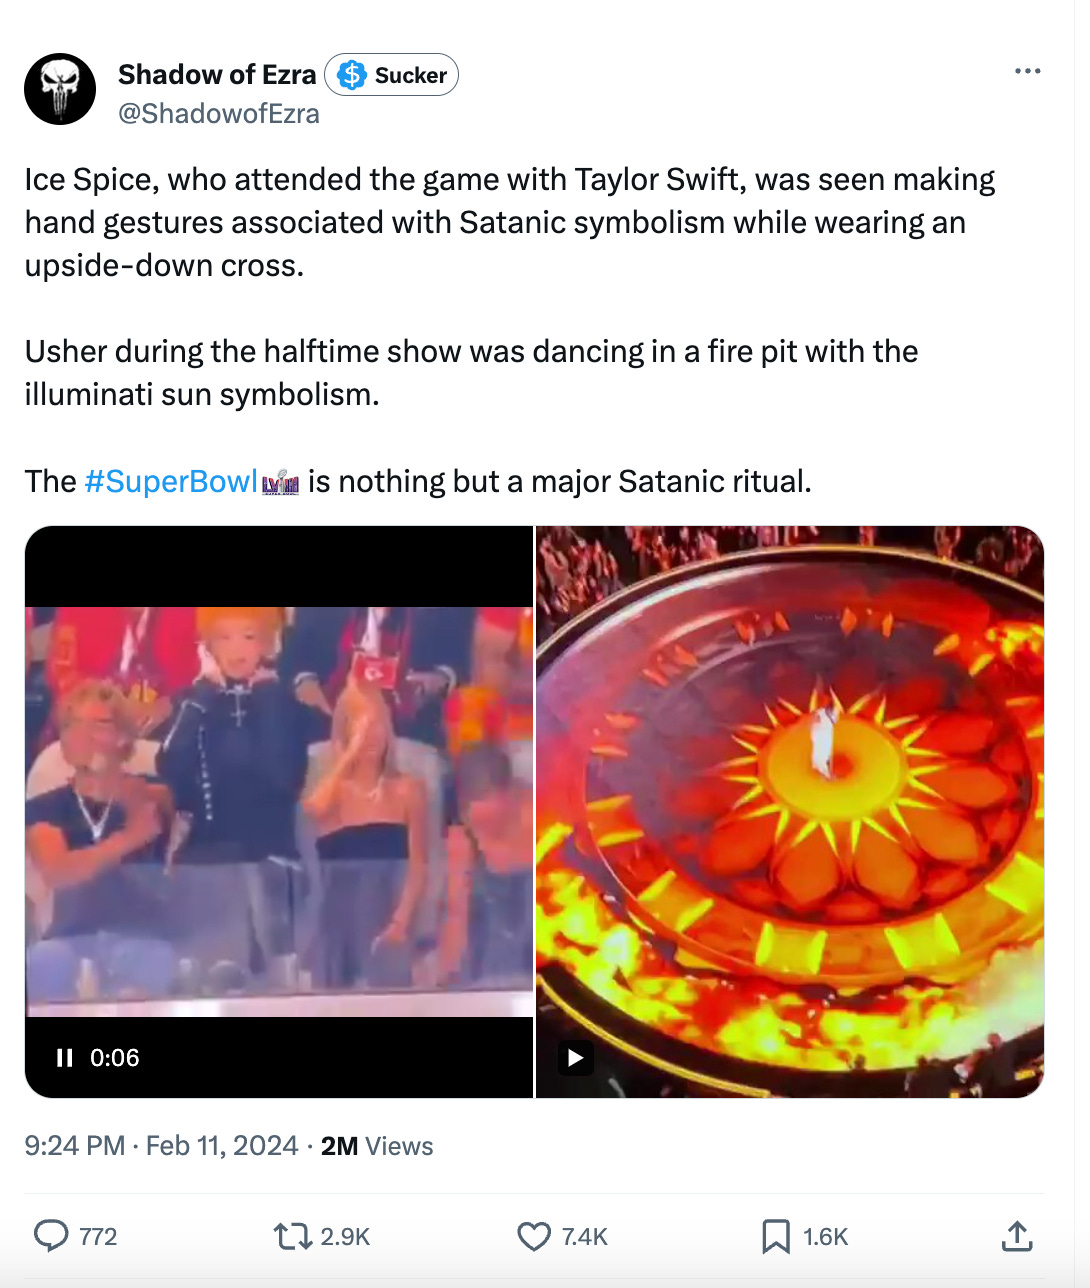 Ice Spice, who attended the game with Taylor Swift, was seen making hand gestures associated with Satanic symbolism while wearing an upside-down cross.  Usher during the halftime show was dancing in a fire pit with the illuminati sun symbolism.  The #SuperBowl is nothing but a major Satanic ritual.